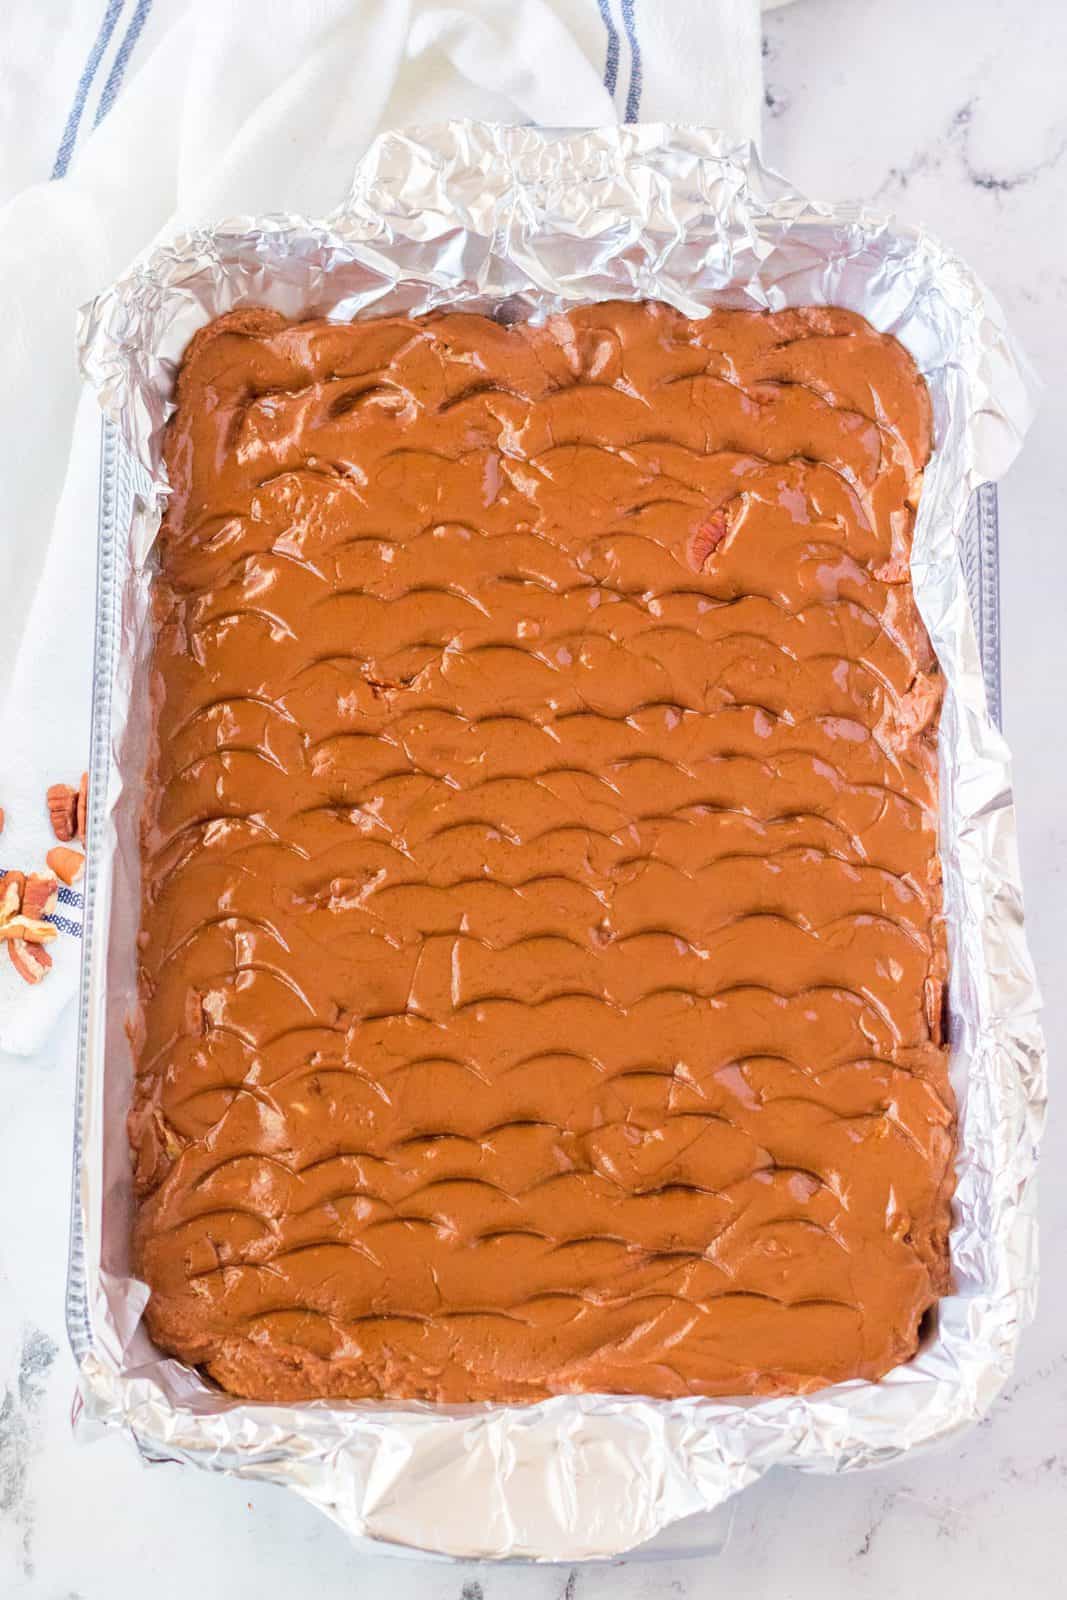 Fudge pressed into a lined baking pan.